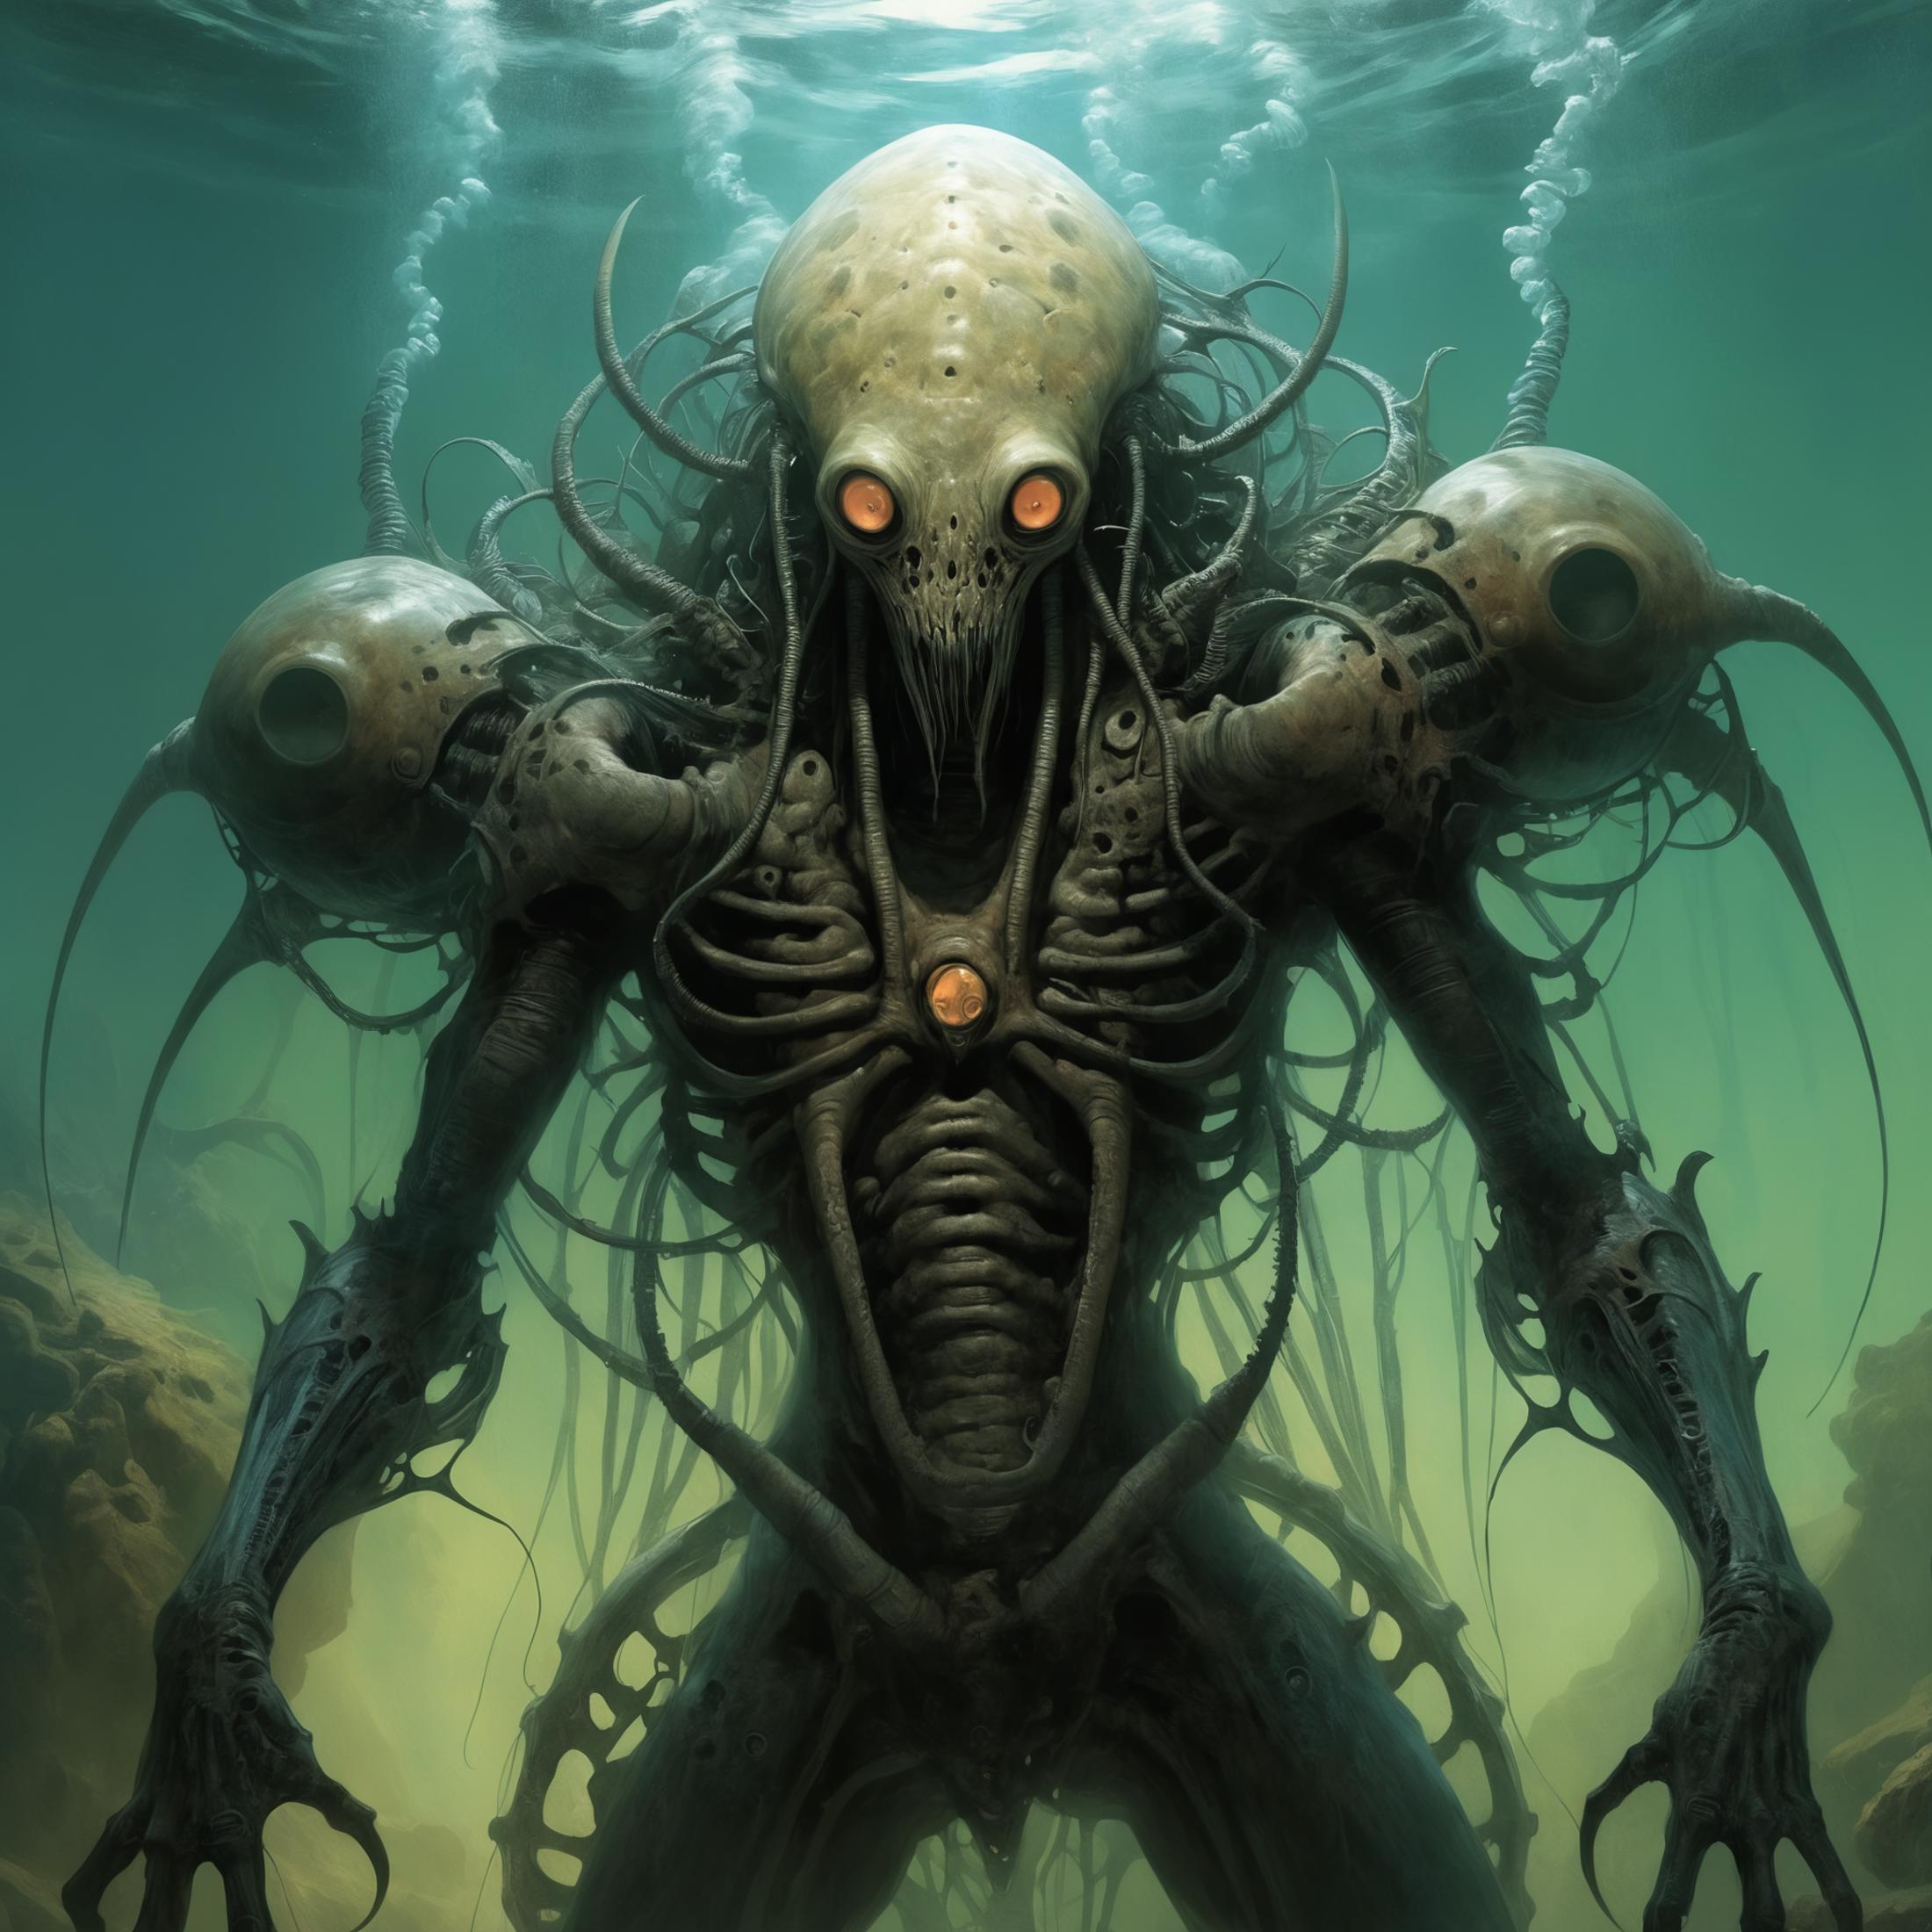 A nightmarish sea creature with glowing eyes and mechanical parts.